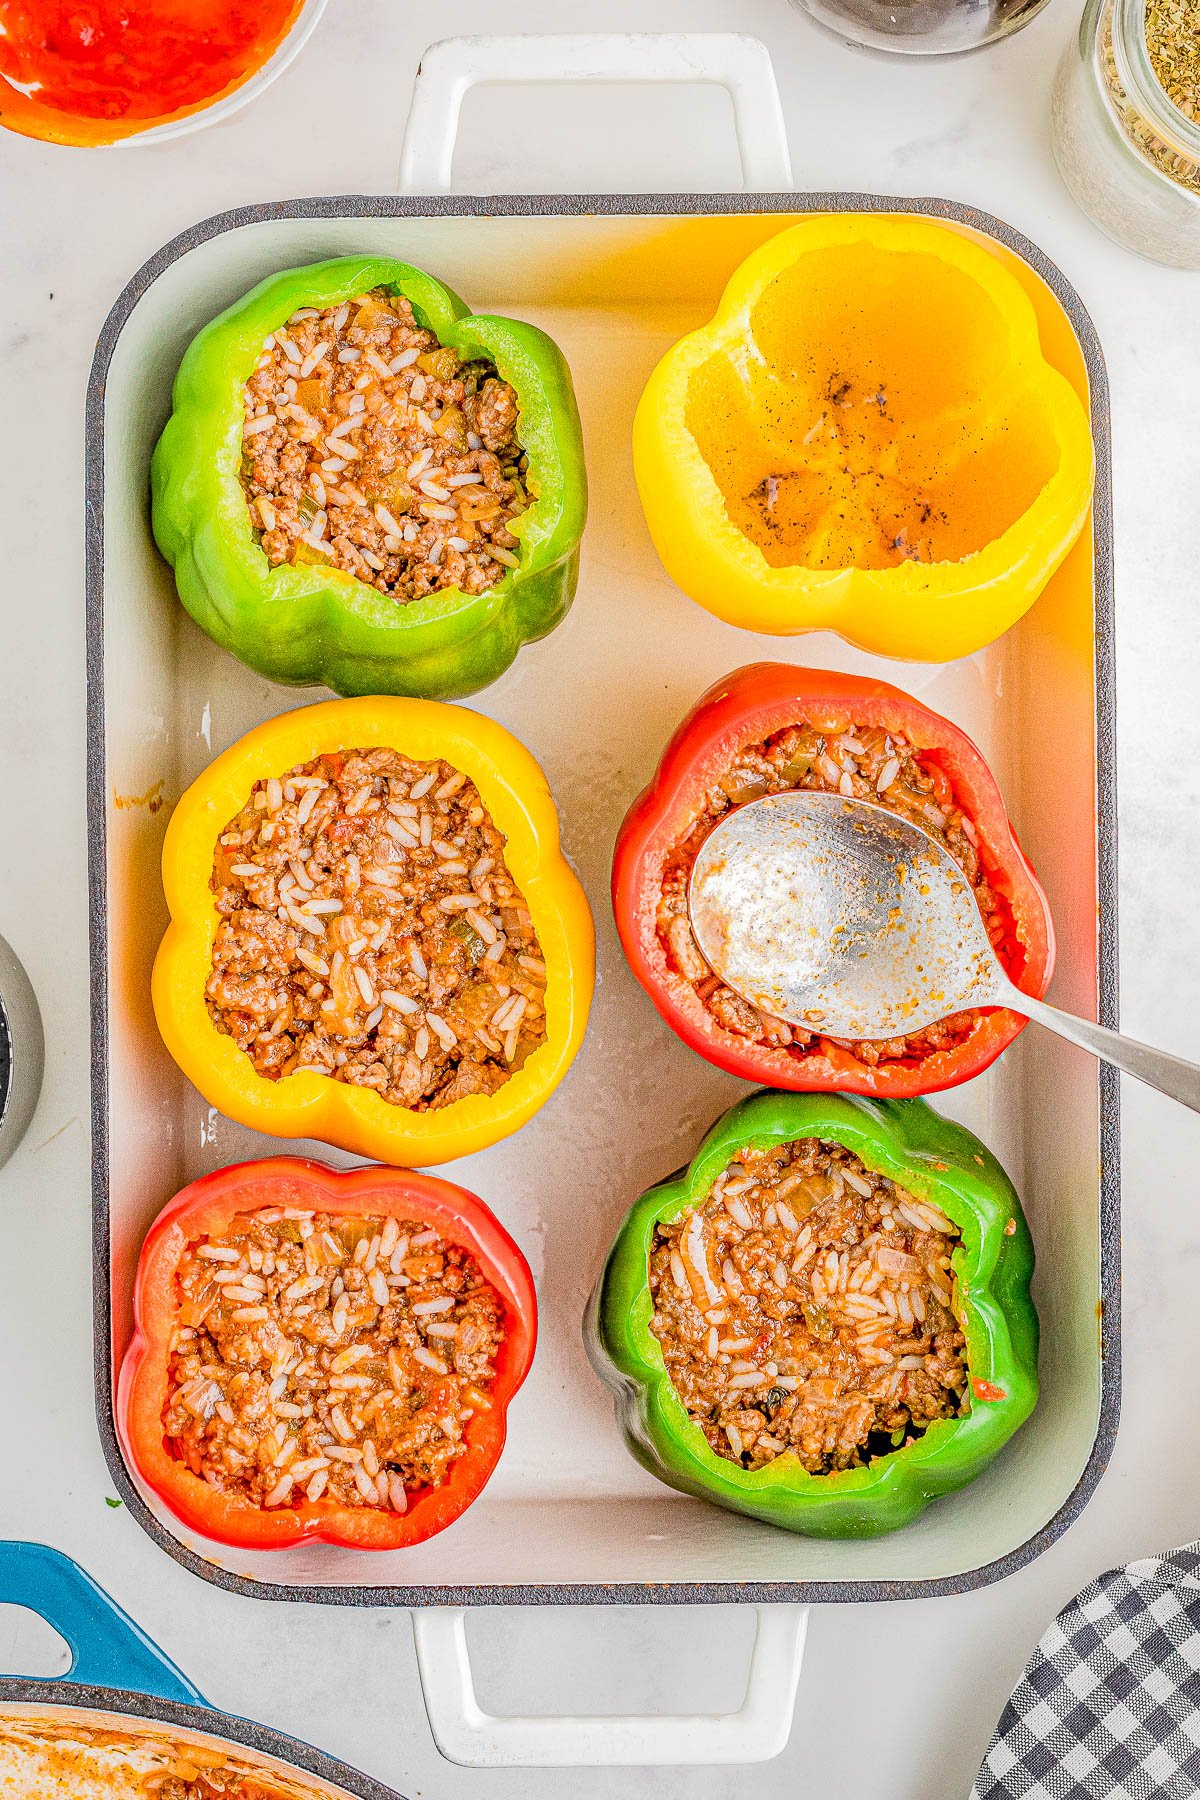 Stuffed Bell Peppers with Ground Beef and Rice — Sweet bell peppers are stuffed with a mixture of Italian sausage, ground beef, rice, and veggies then topped with CHEESE! This is a great meal prep recipe that comes in handy on busy weeknights! EASY, hearty, comfort food that the whole family will love!